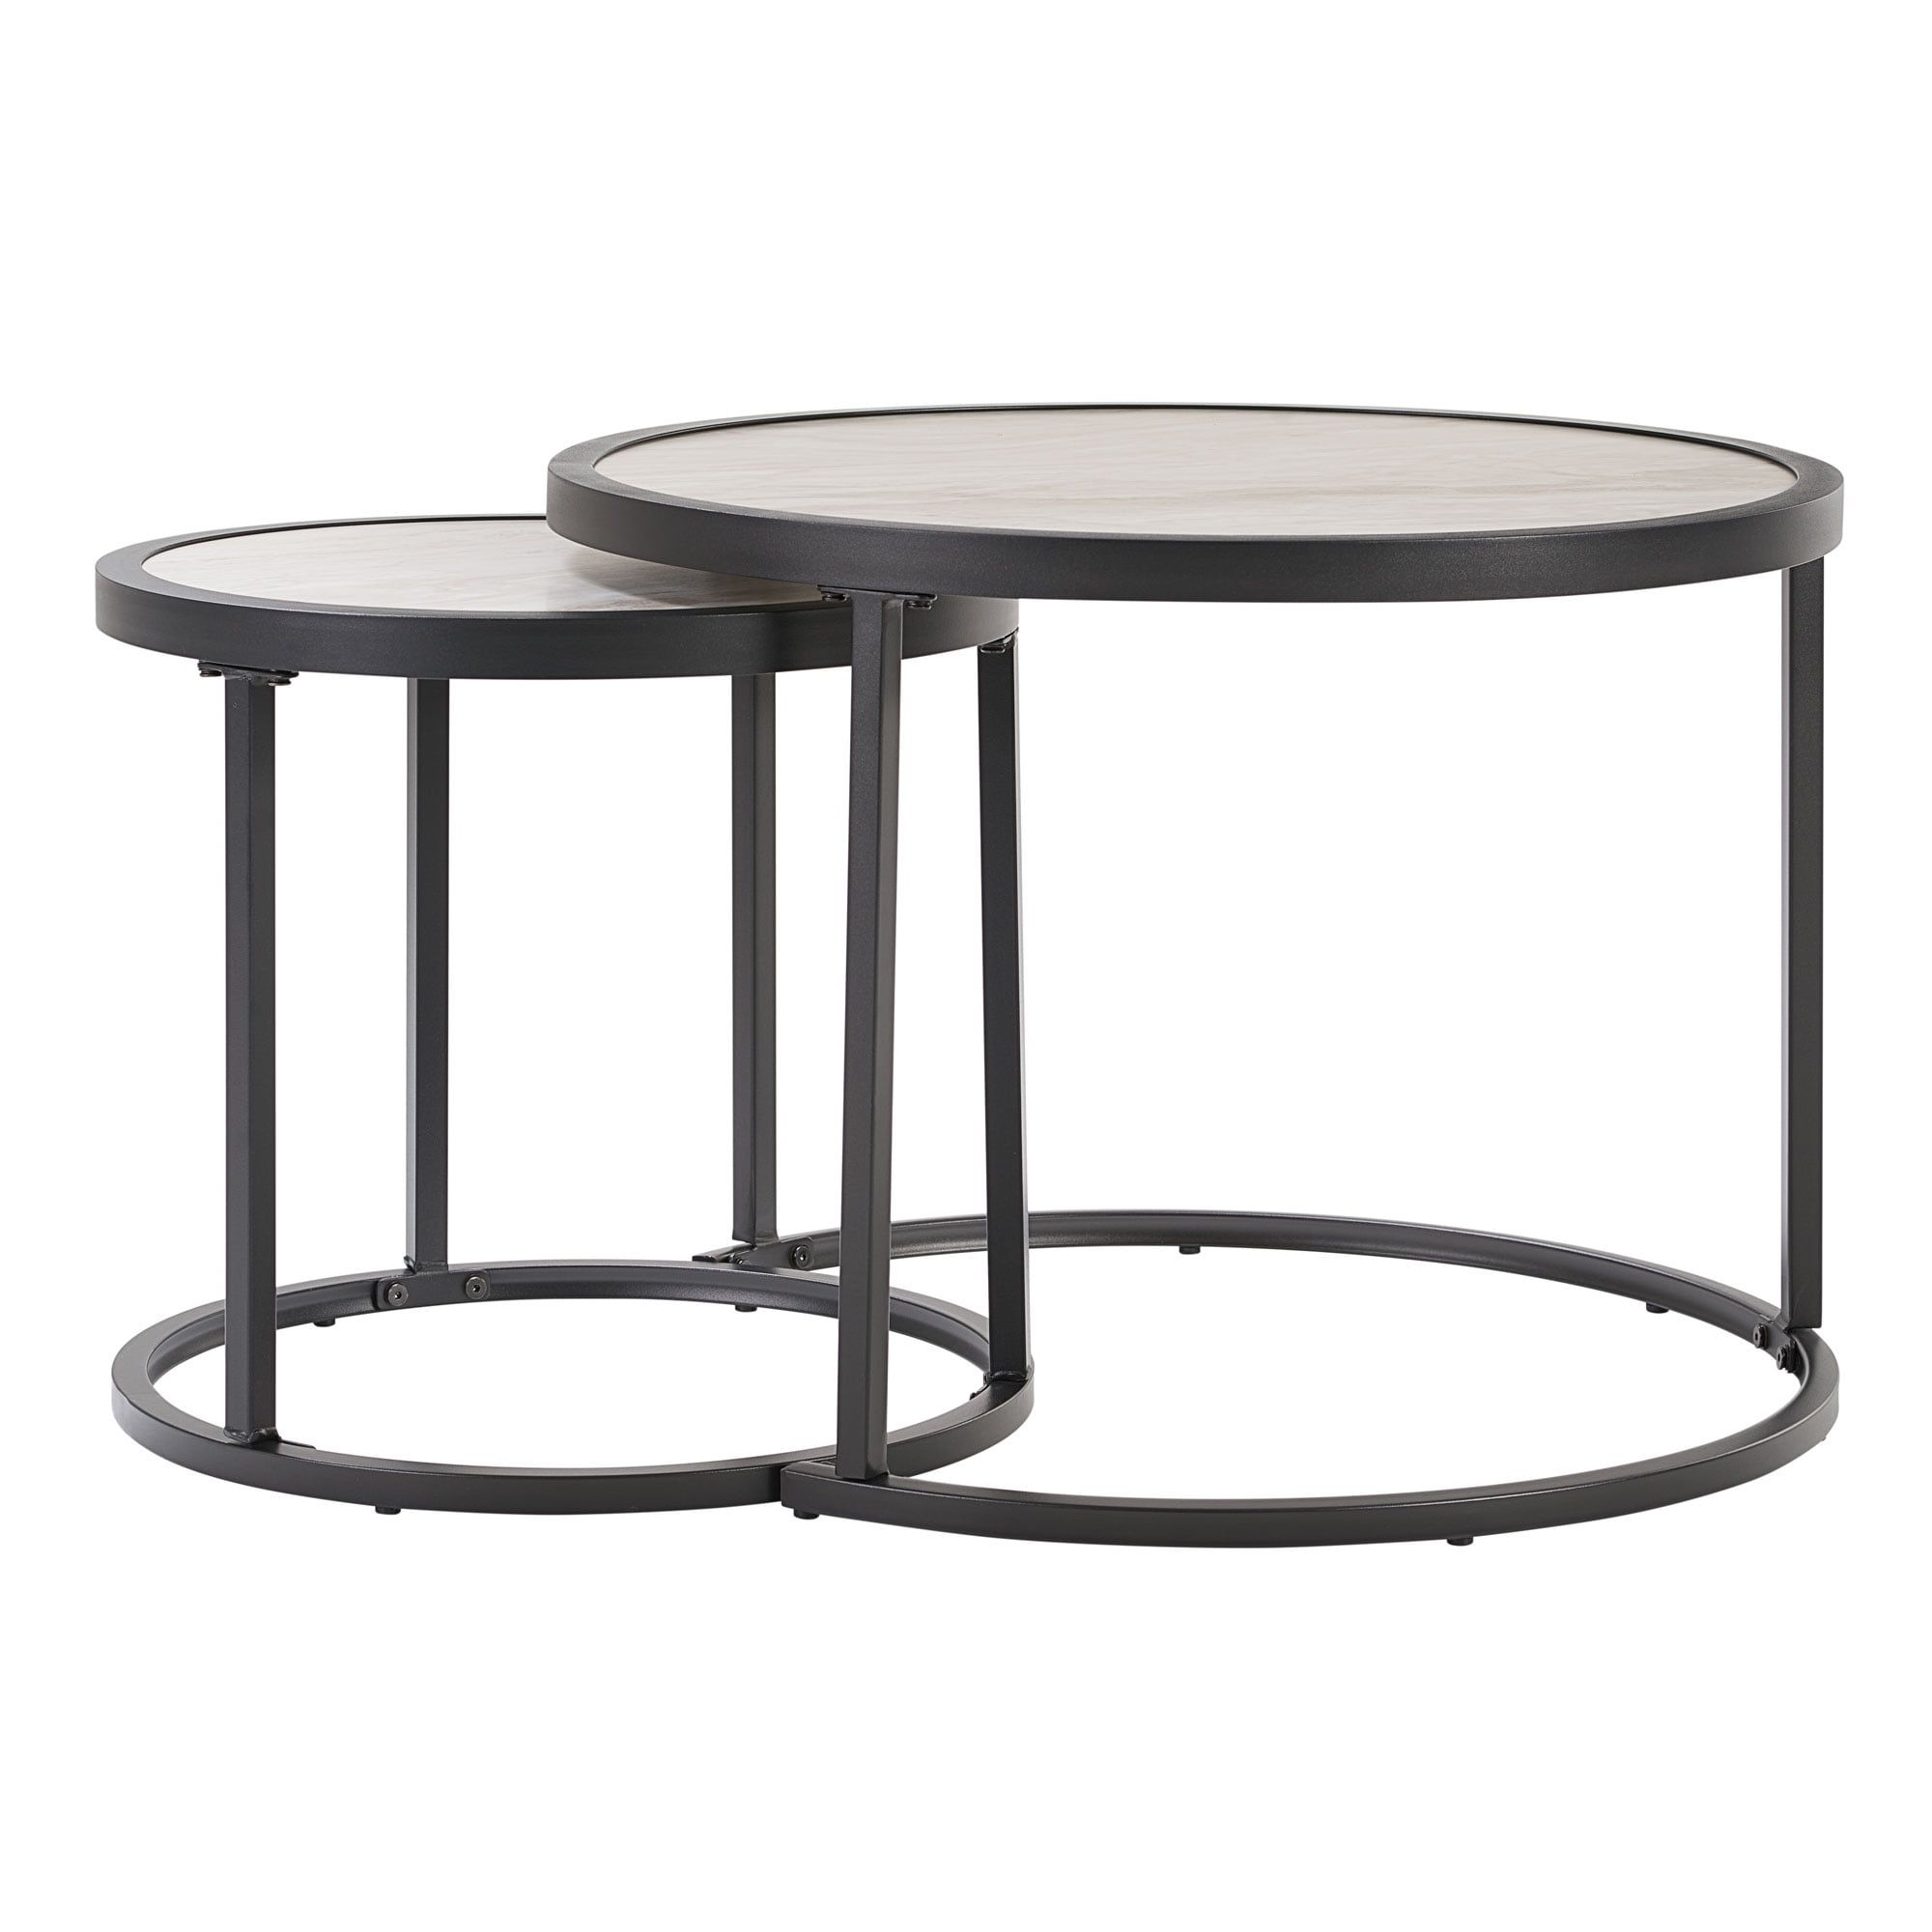 Most Recent Oaks Table Set With Patio Cover Within Better Homes & Gardens River Oaks 3 Piece Sofa And Nesting Tables With Patio  Cover, Dark – Walmart (Photo 14 of 15)